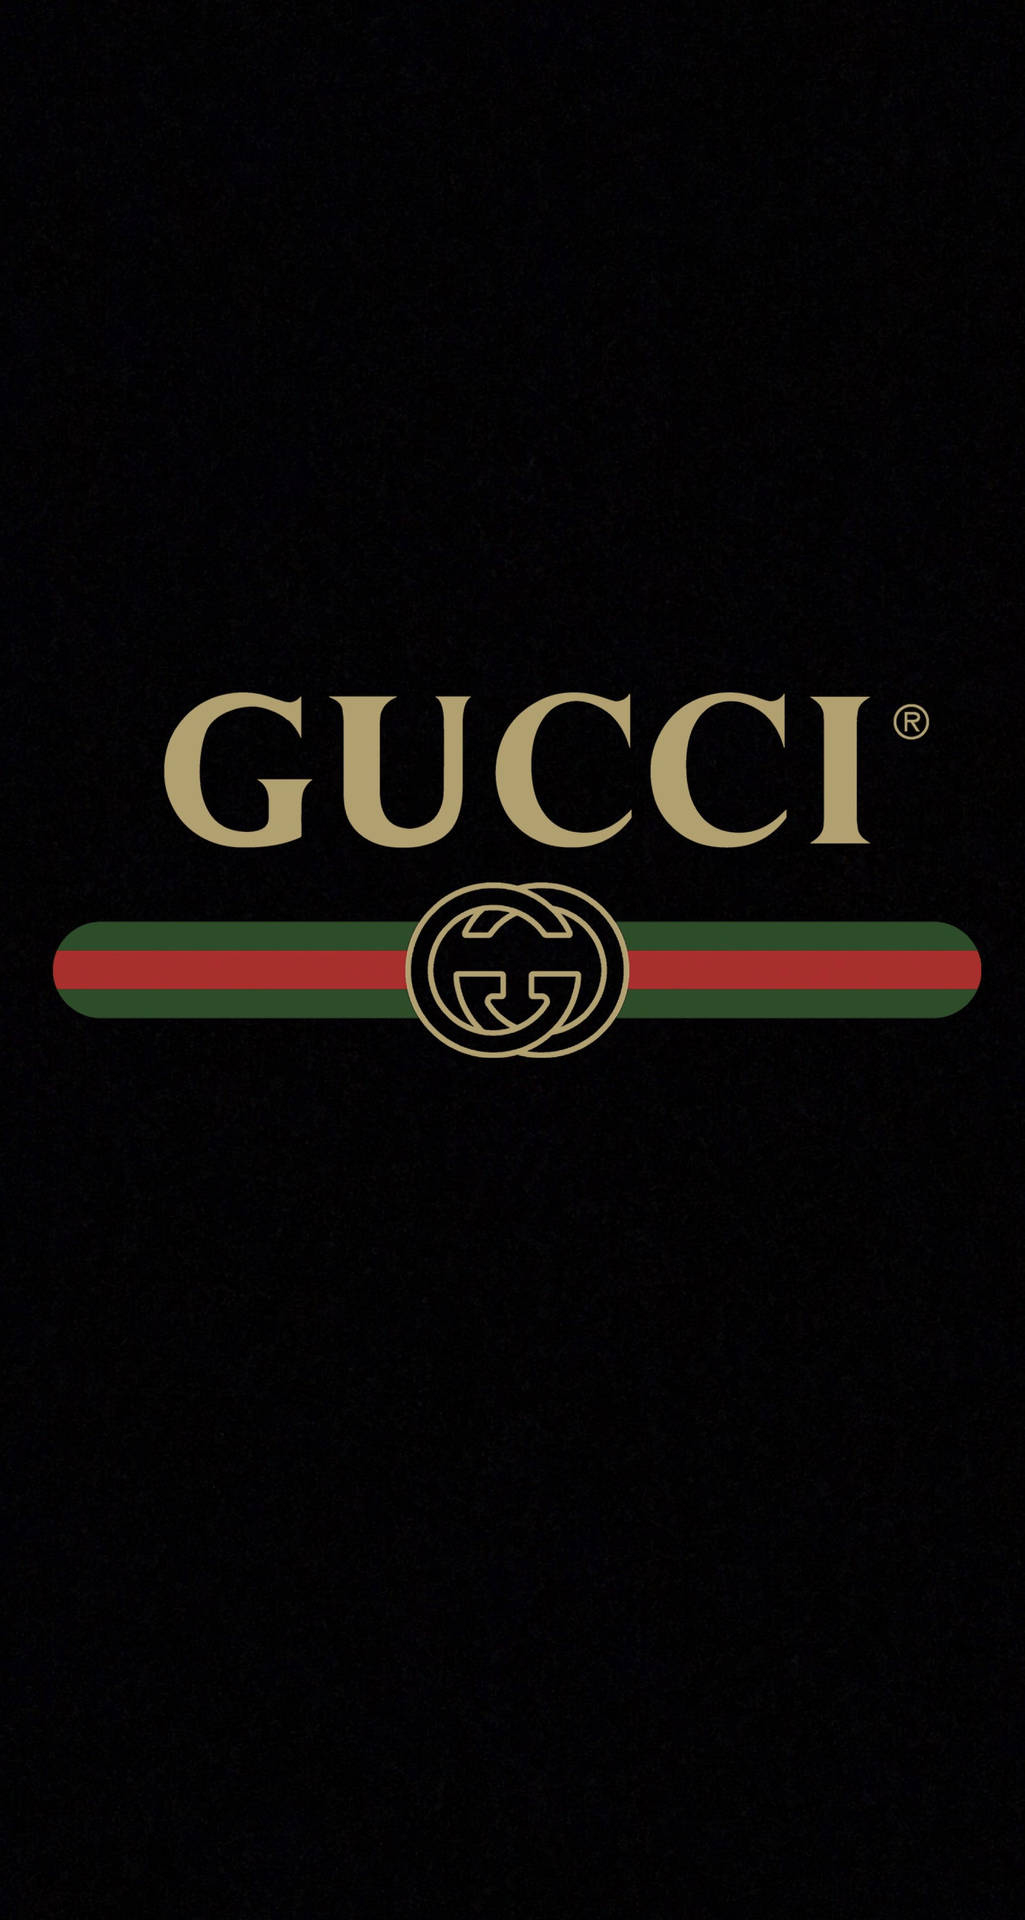 Gucci Wallpapers for iPhone Mobile 